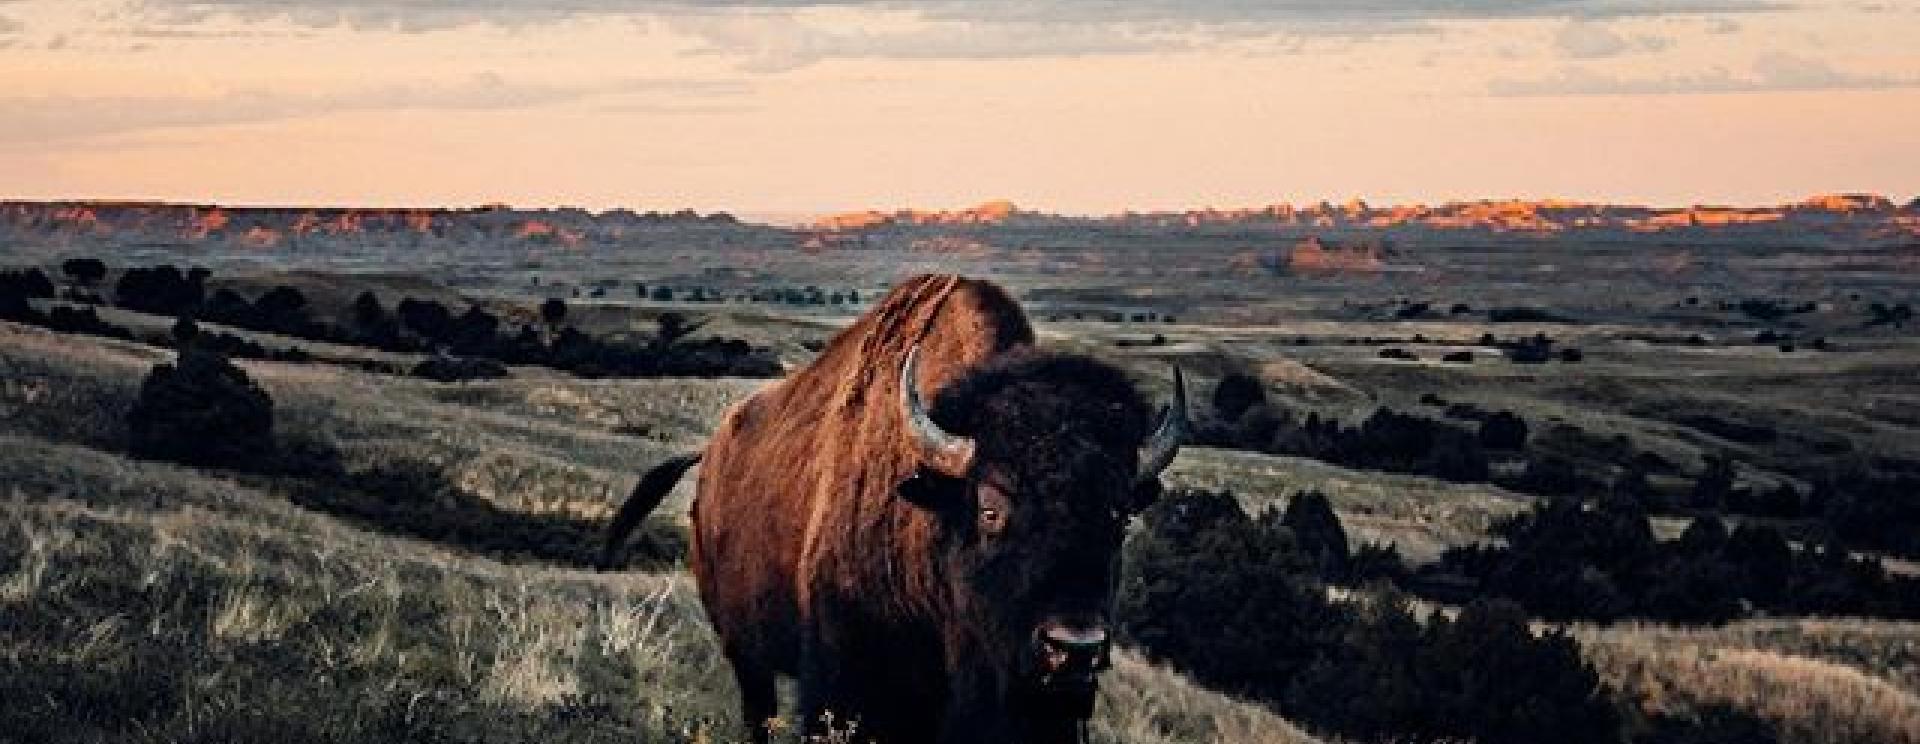 The 5 Most Remarkable Photos of the Black Hills and Badlands in October 2020